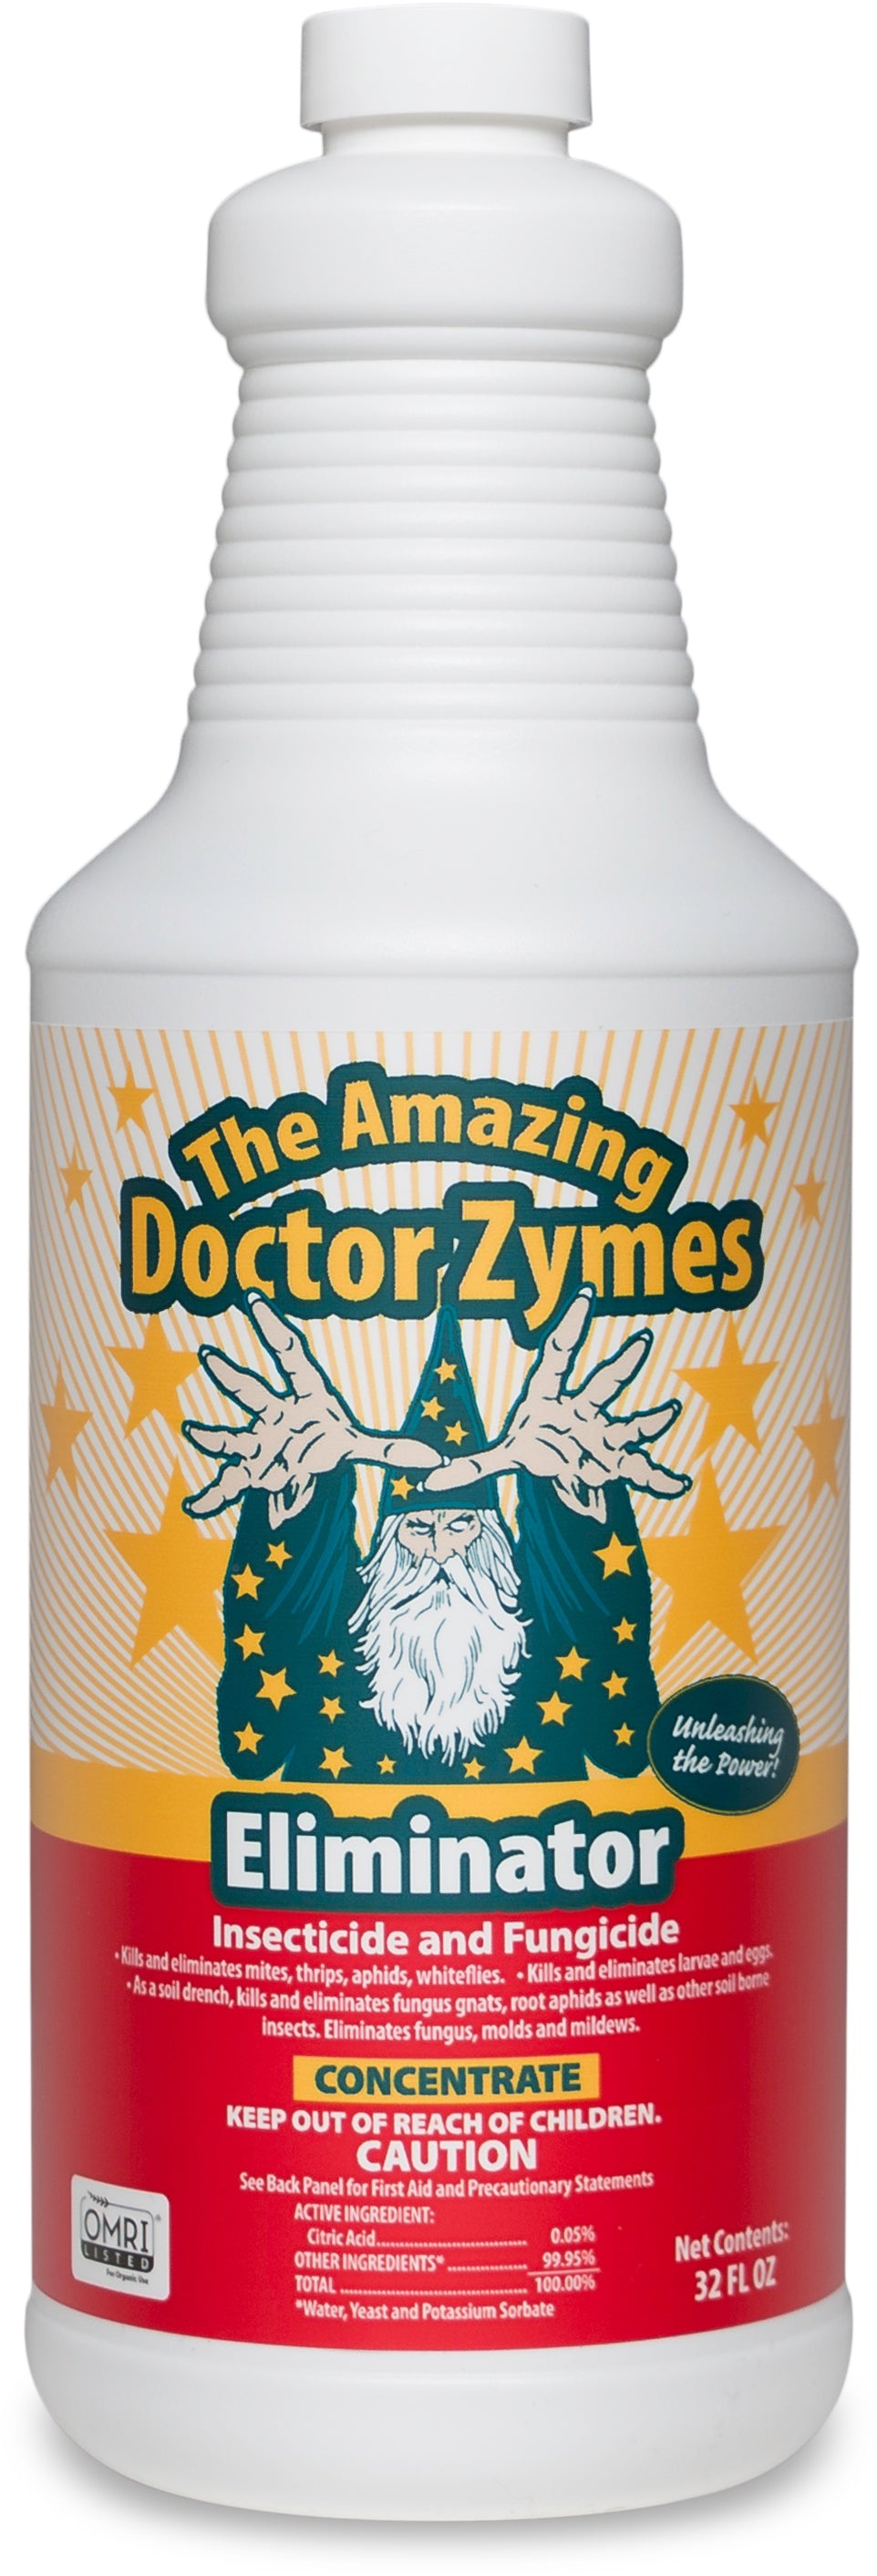 Amazing Doctor Zymes Eliminator Concentrate, 32 oz.